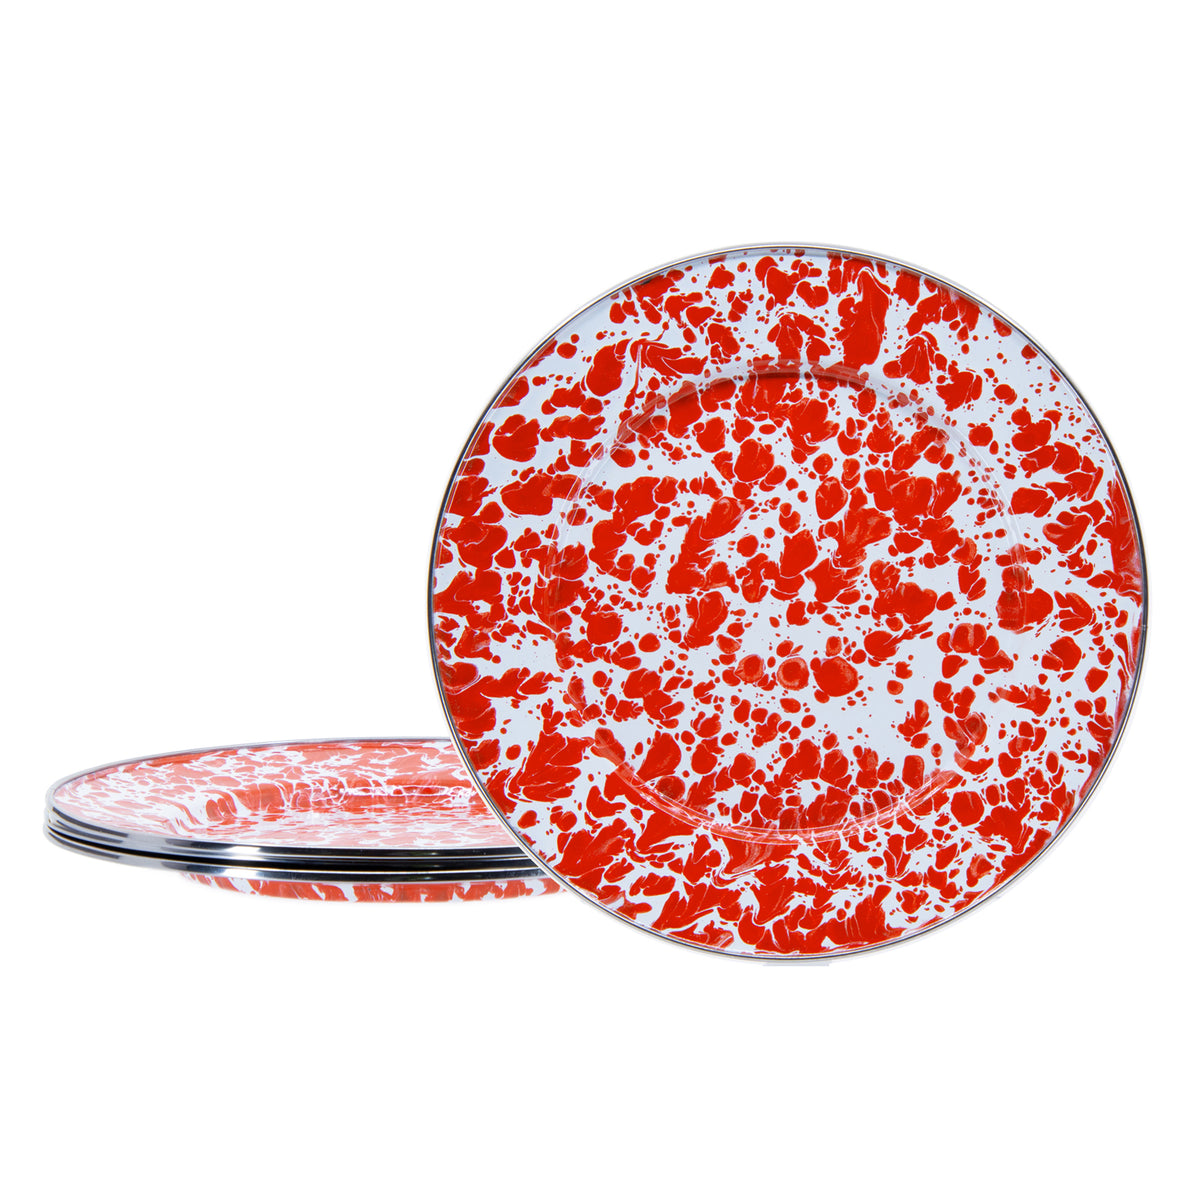 Dinner Plates in Red Swirl, Set of 4